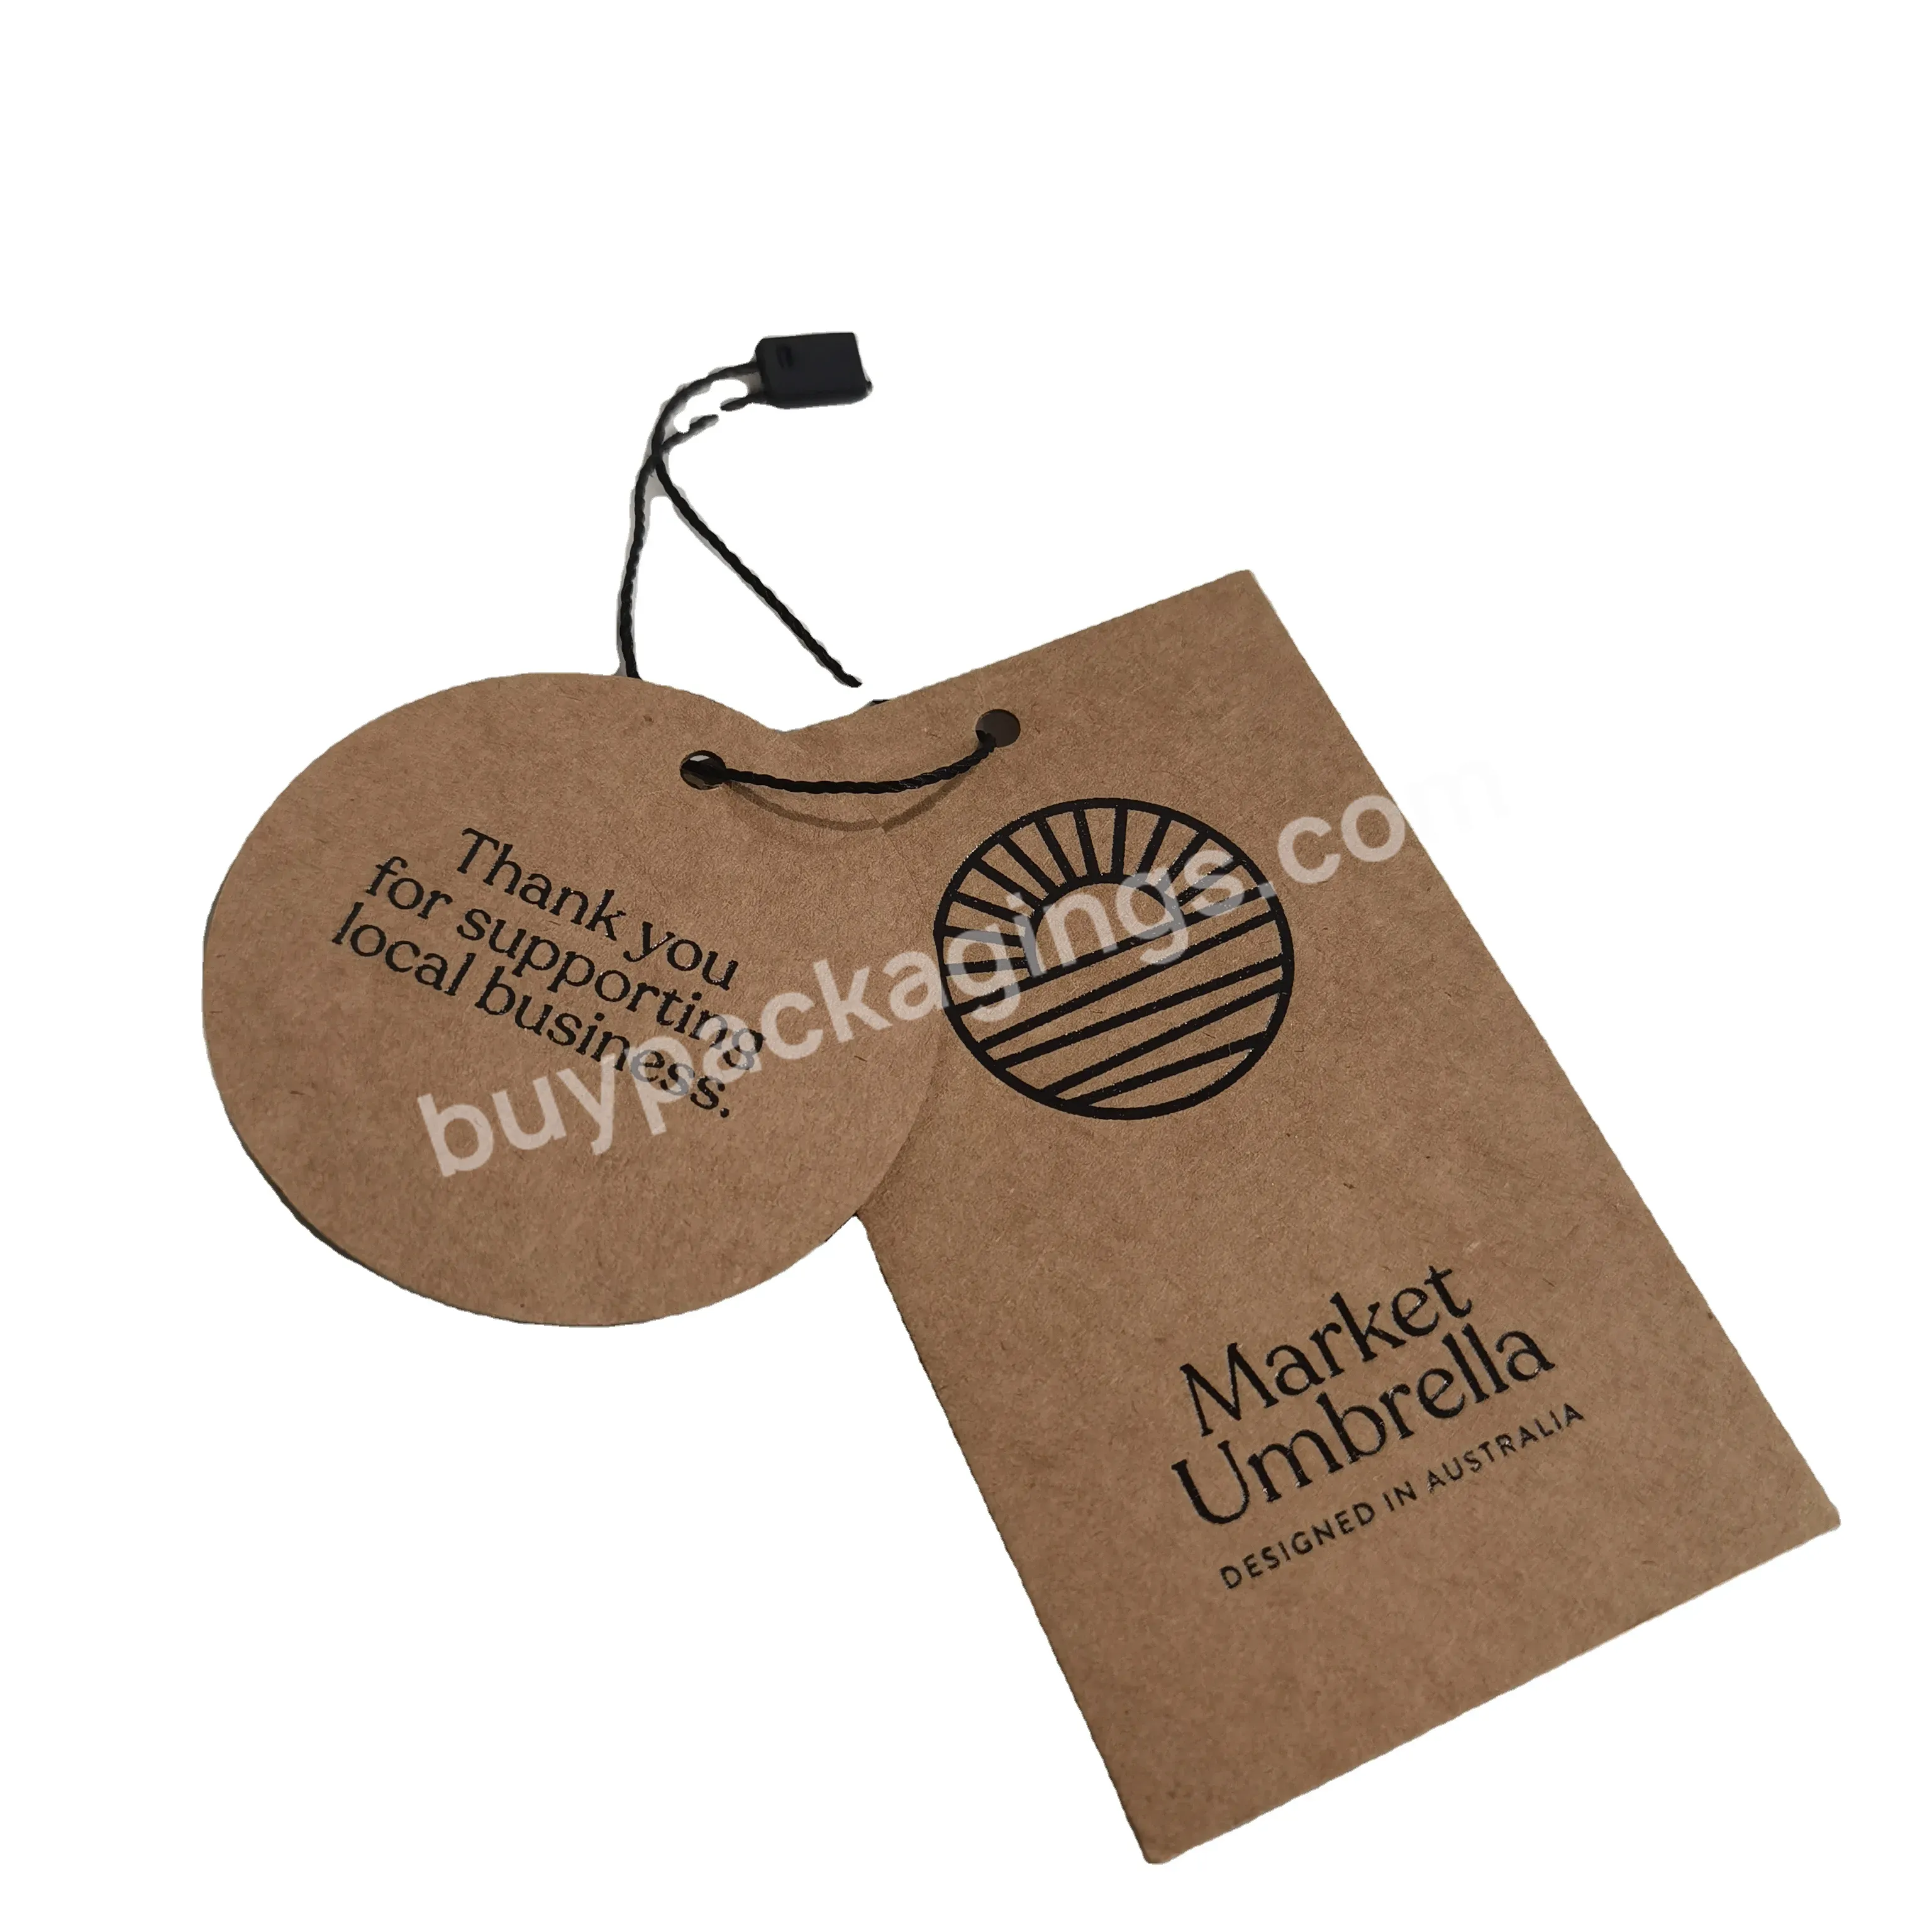 Super Low Moq Custom 100% Recyclable Brown Kraft Paper Hang Tags With Black Foil Printing Logo - Buy Recycled Paper Tags,Garment Hang Tag,Security Garment Tags.